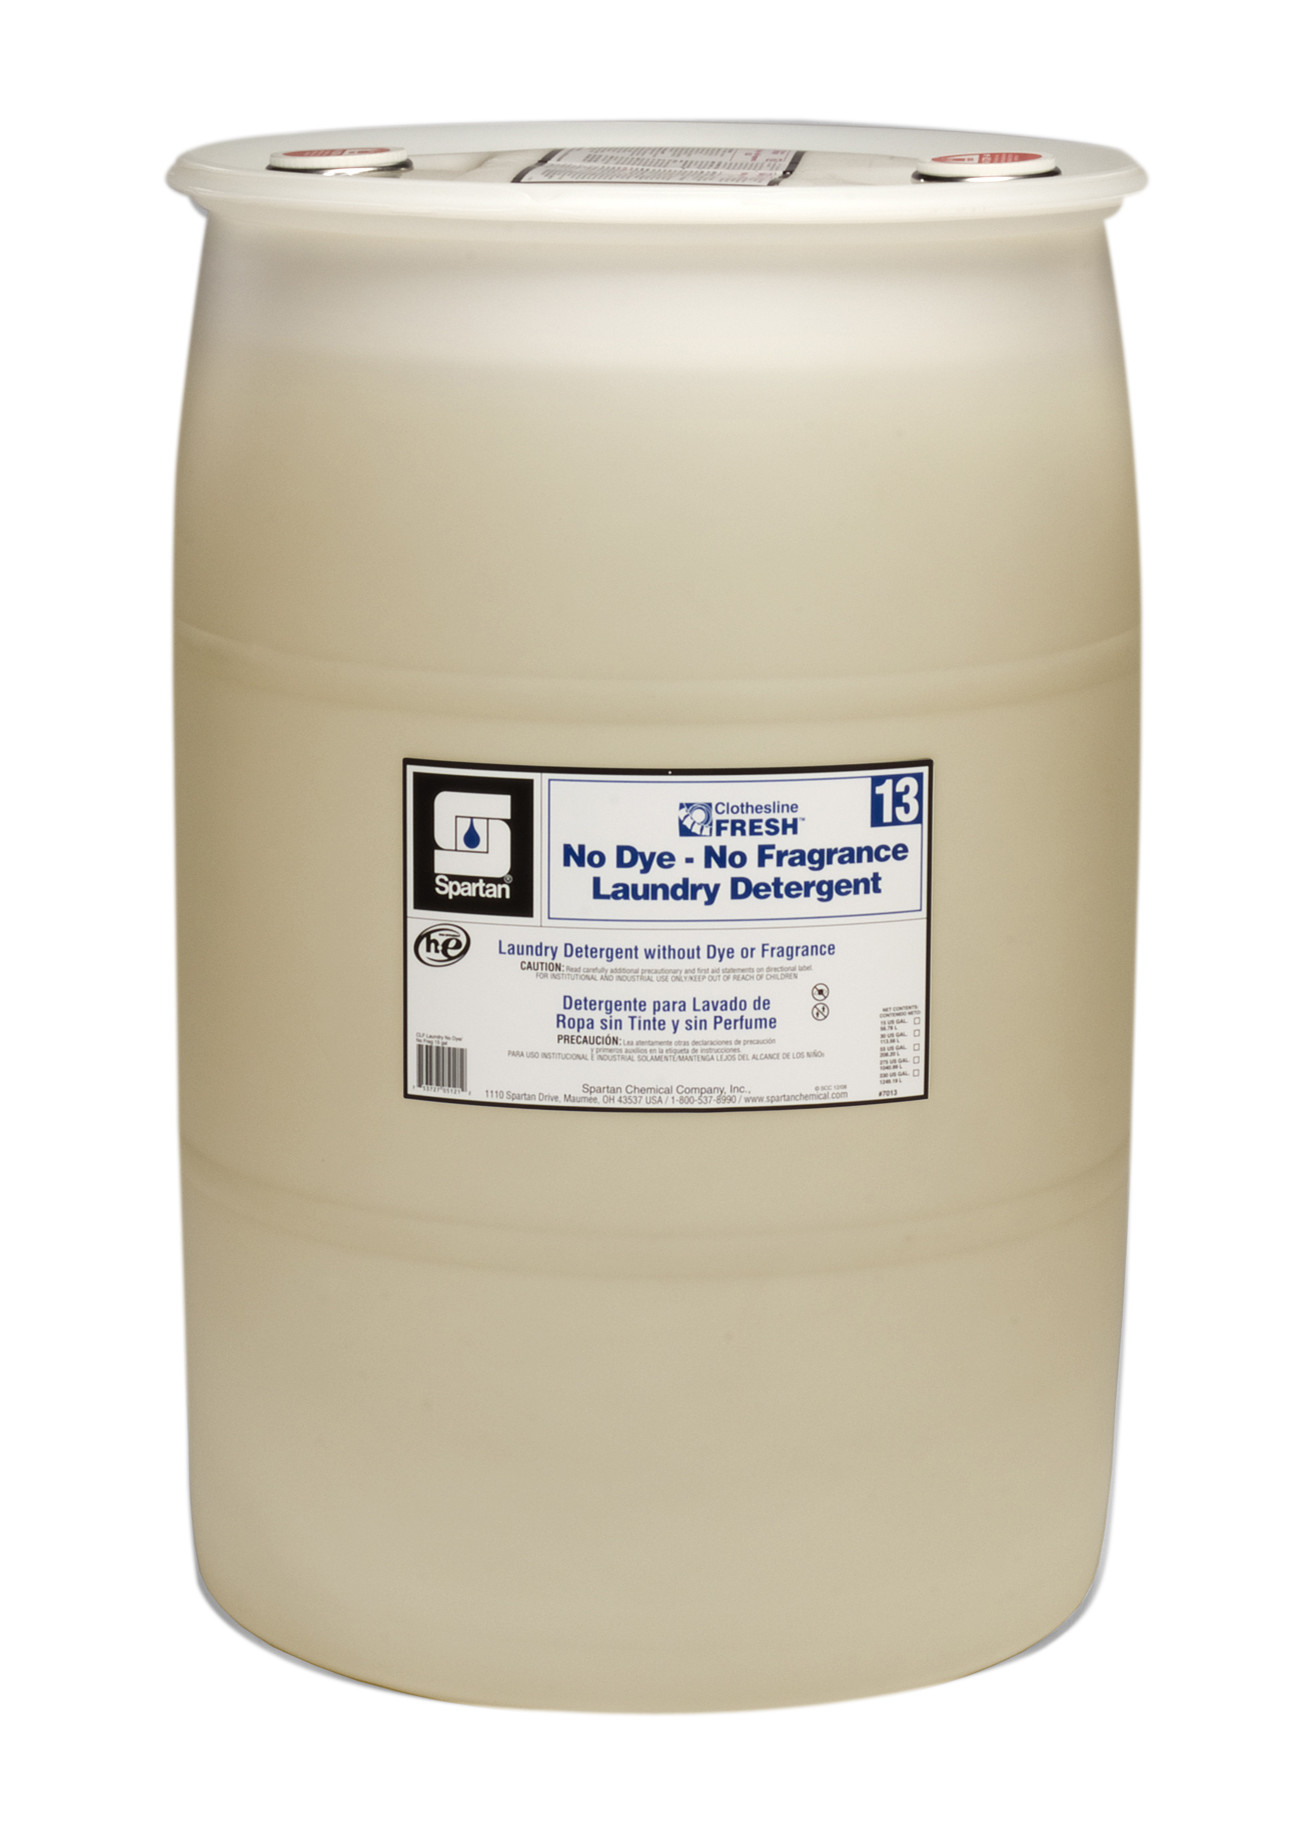 Spartan Chemical Company Clothesline Fresh No Dye-No Fragrance Laundry Detergent 13, 55 GAL DRUM